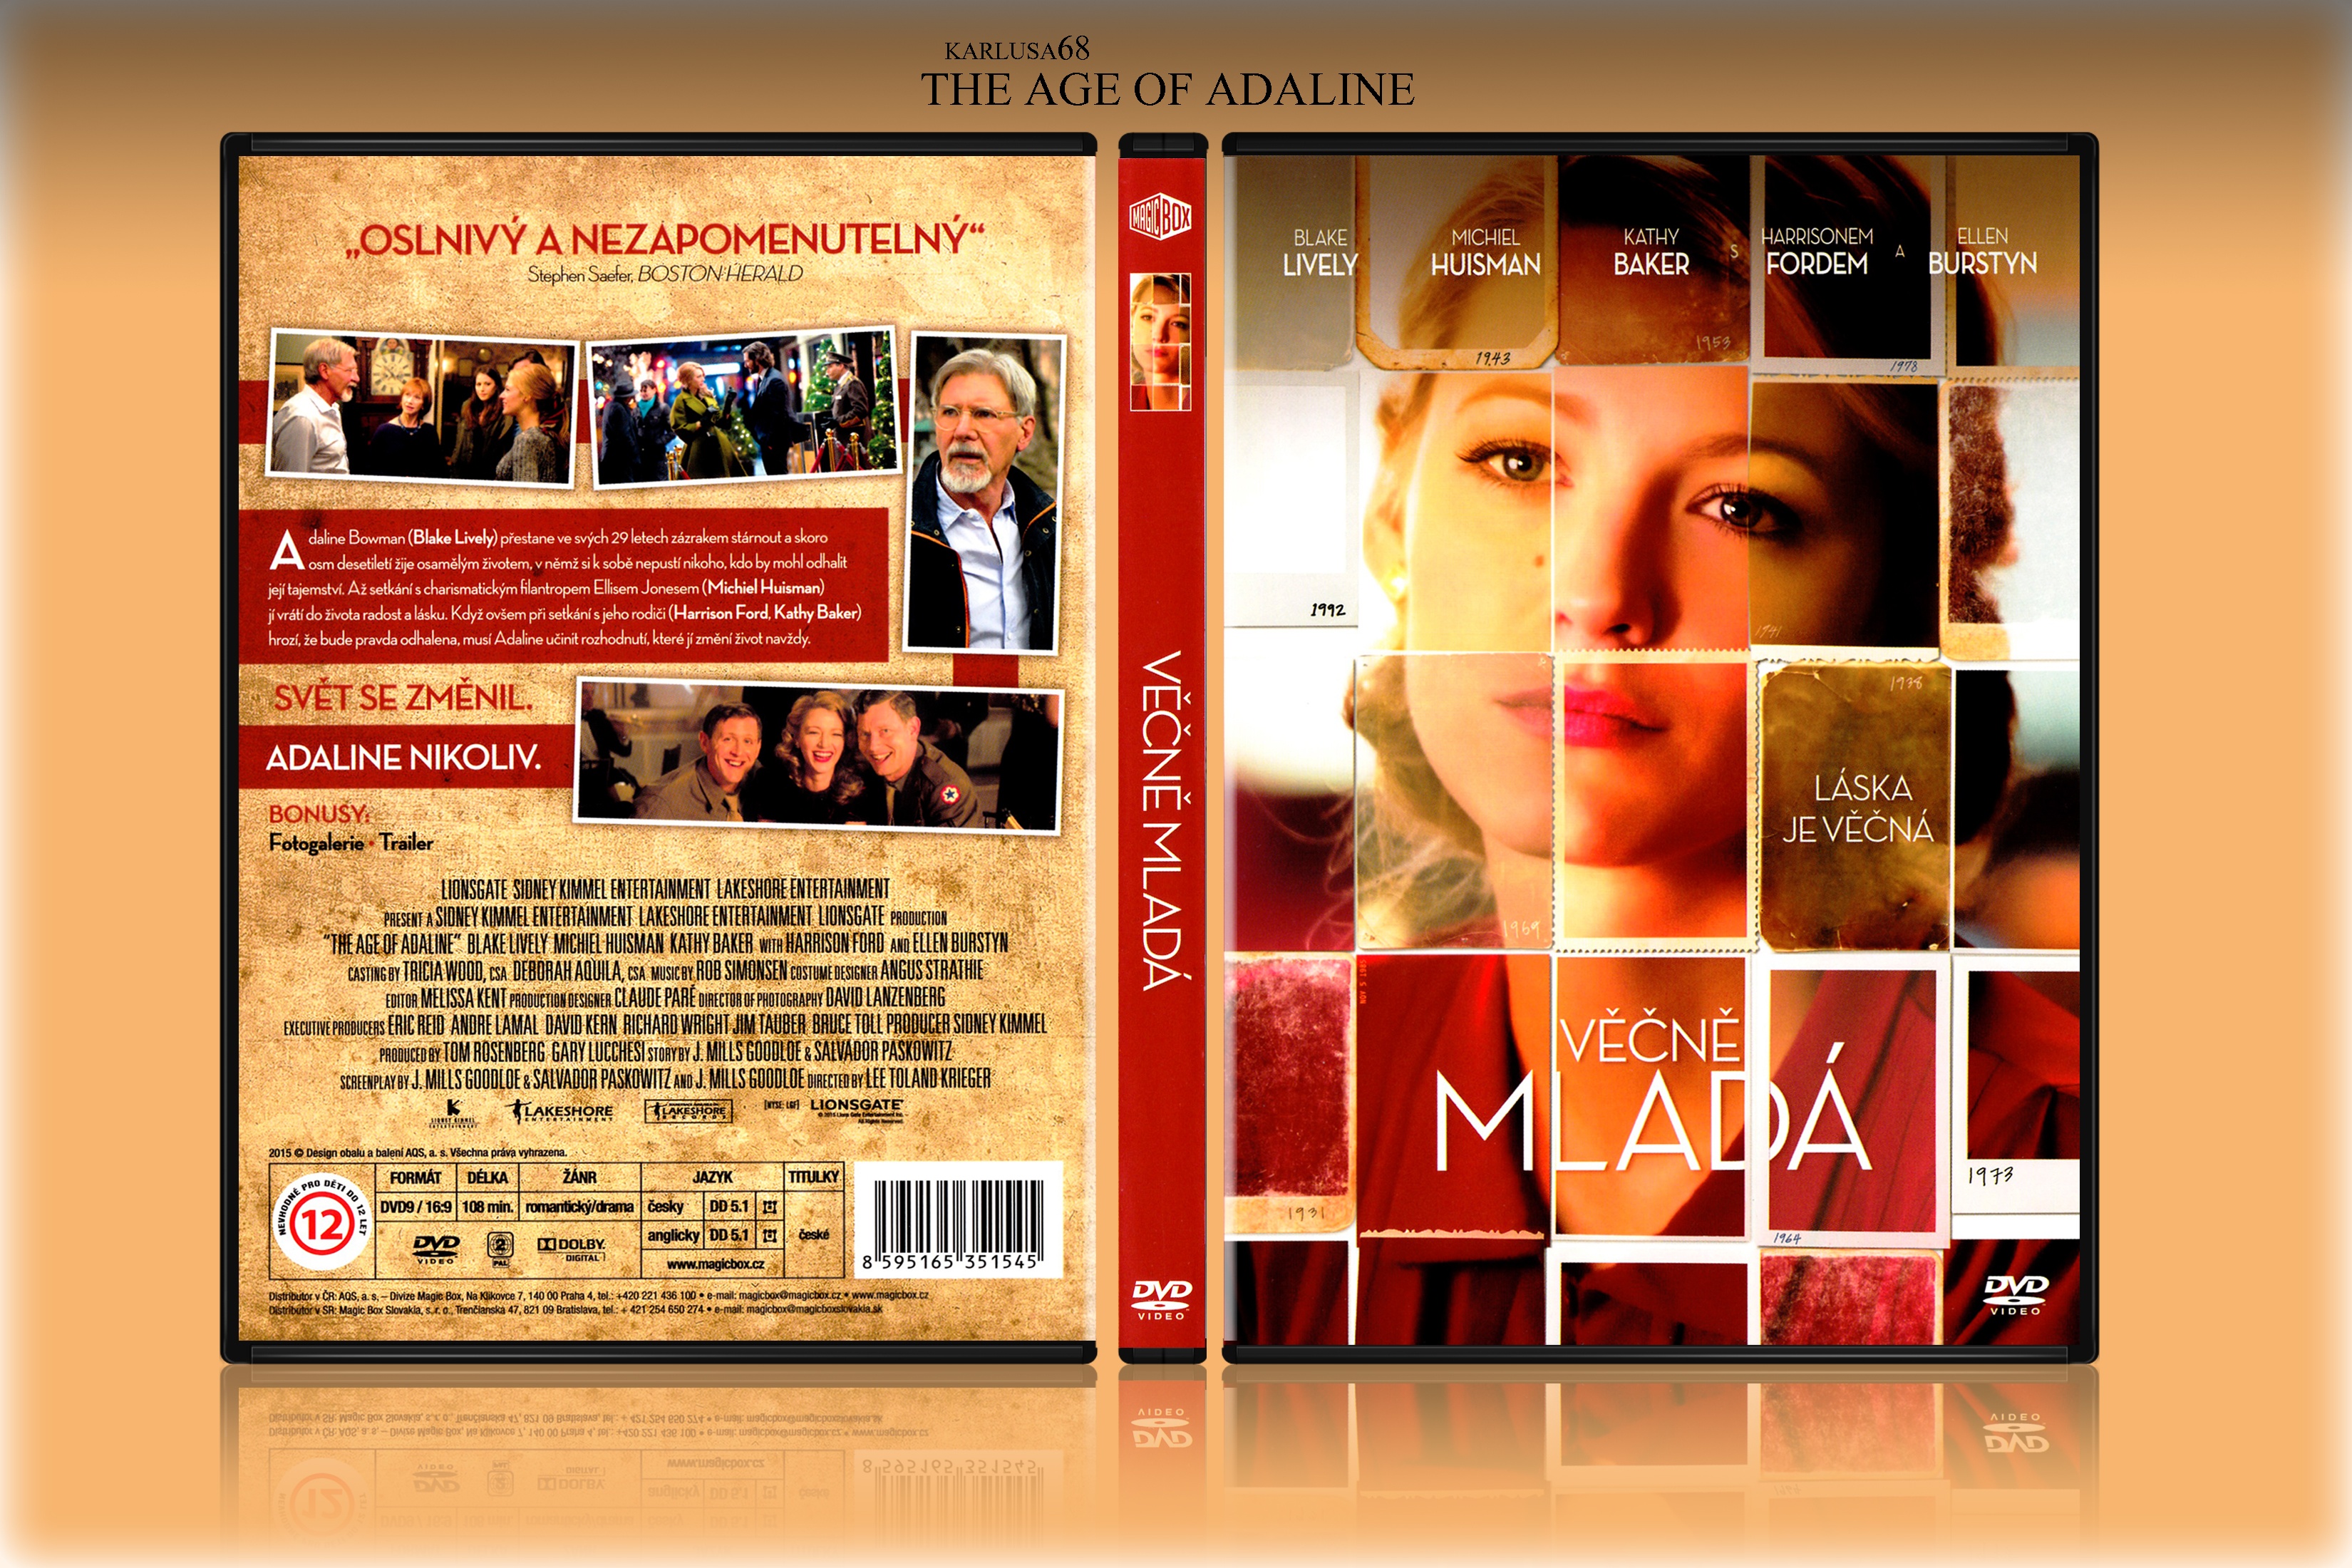 The age of adaline box cover